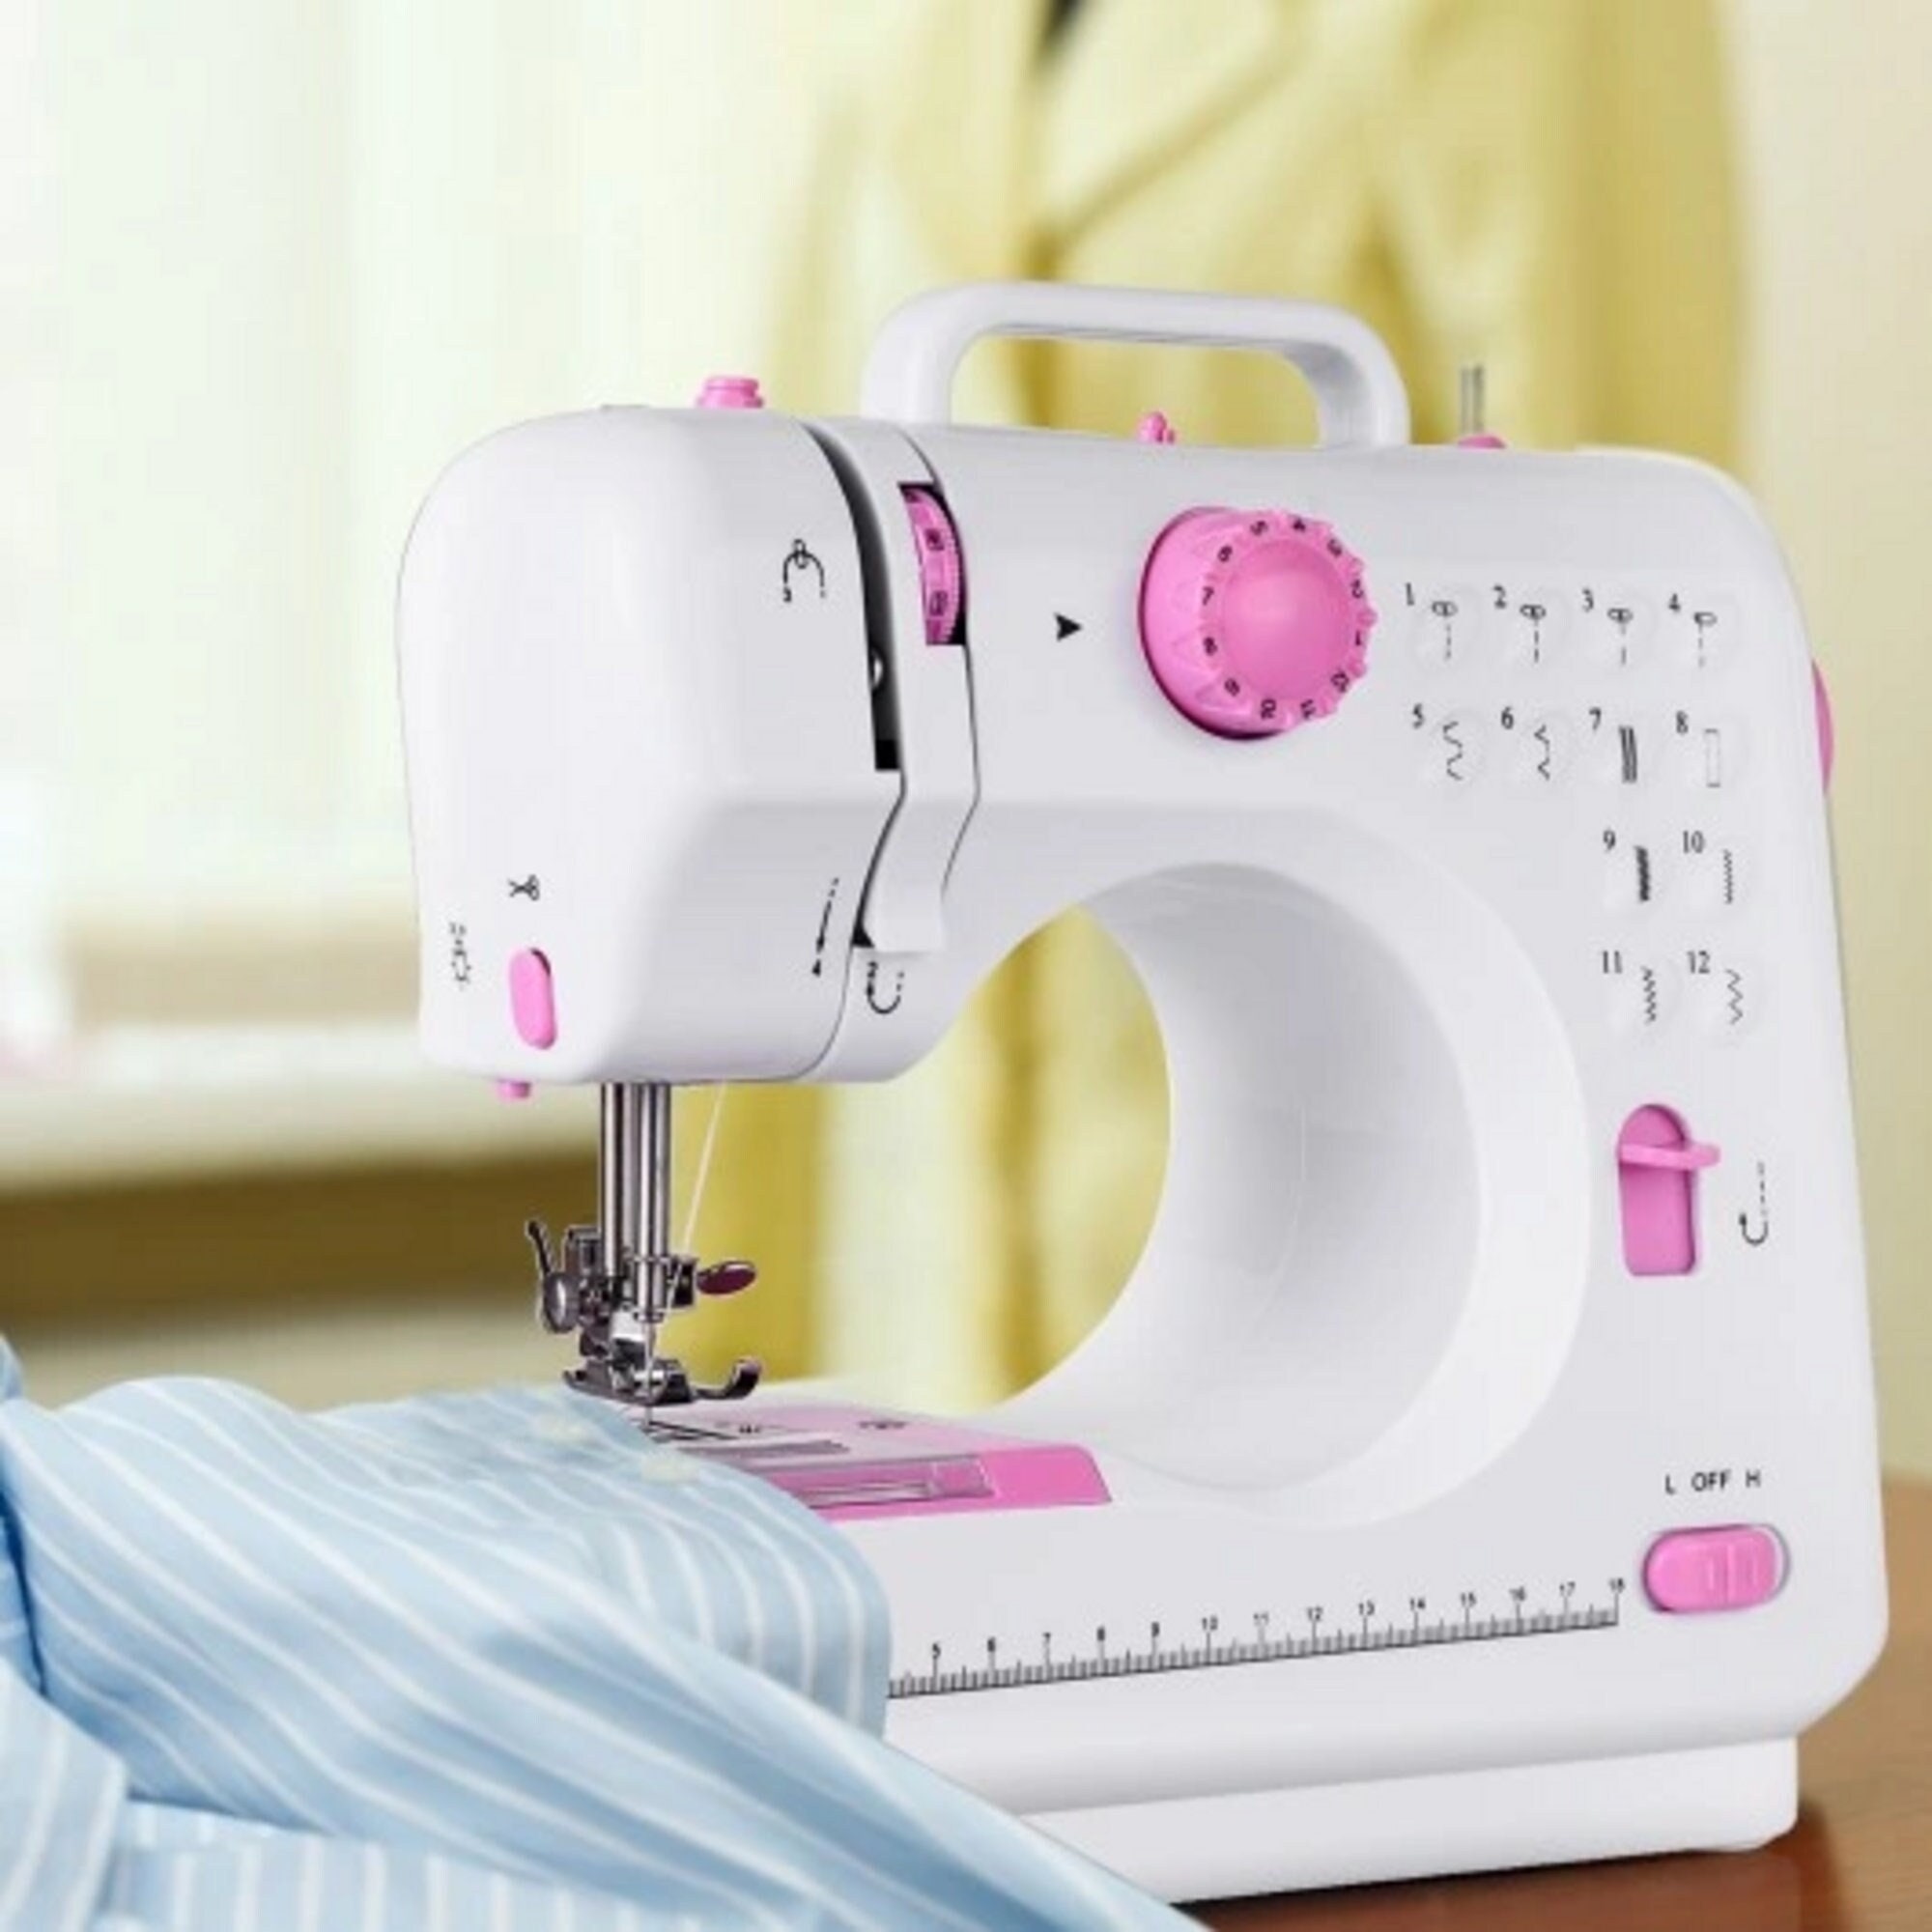 Mini Sewing Machine with 16 Stitch Patterns, Portable Adjustable 2-Speed  Crafting Mending Machine with Foot Pedal for Household Kids Beginners  Travel